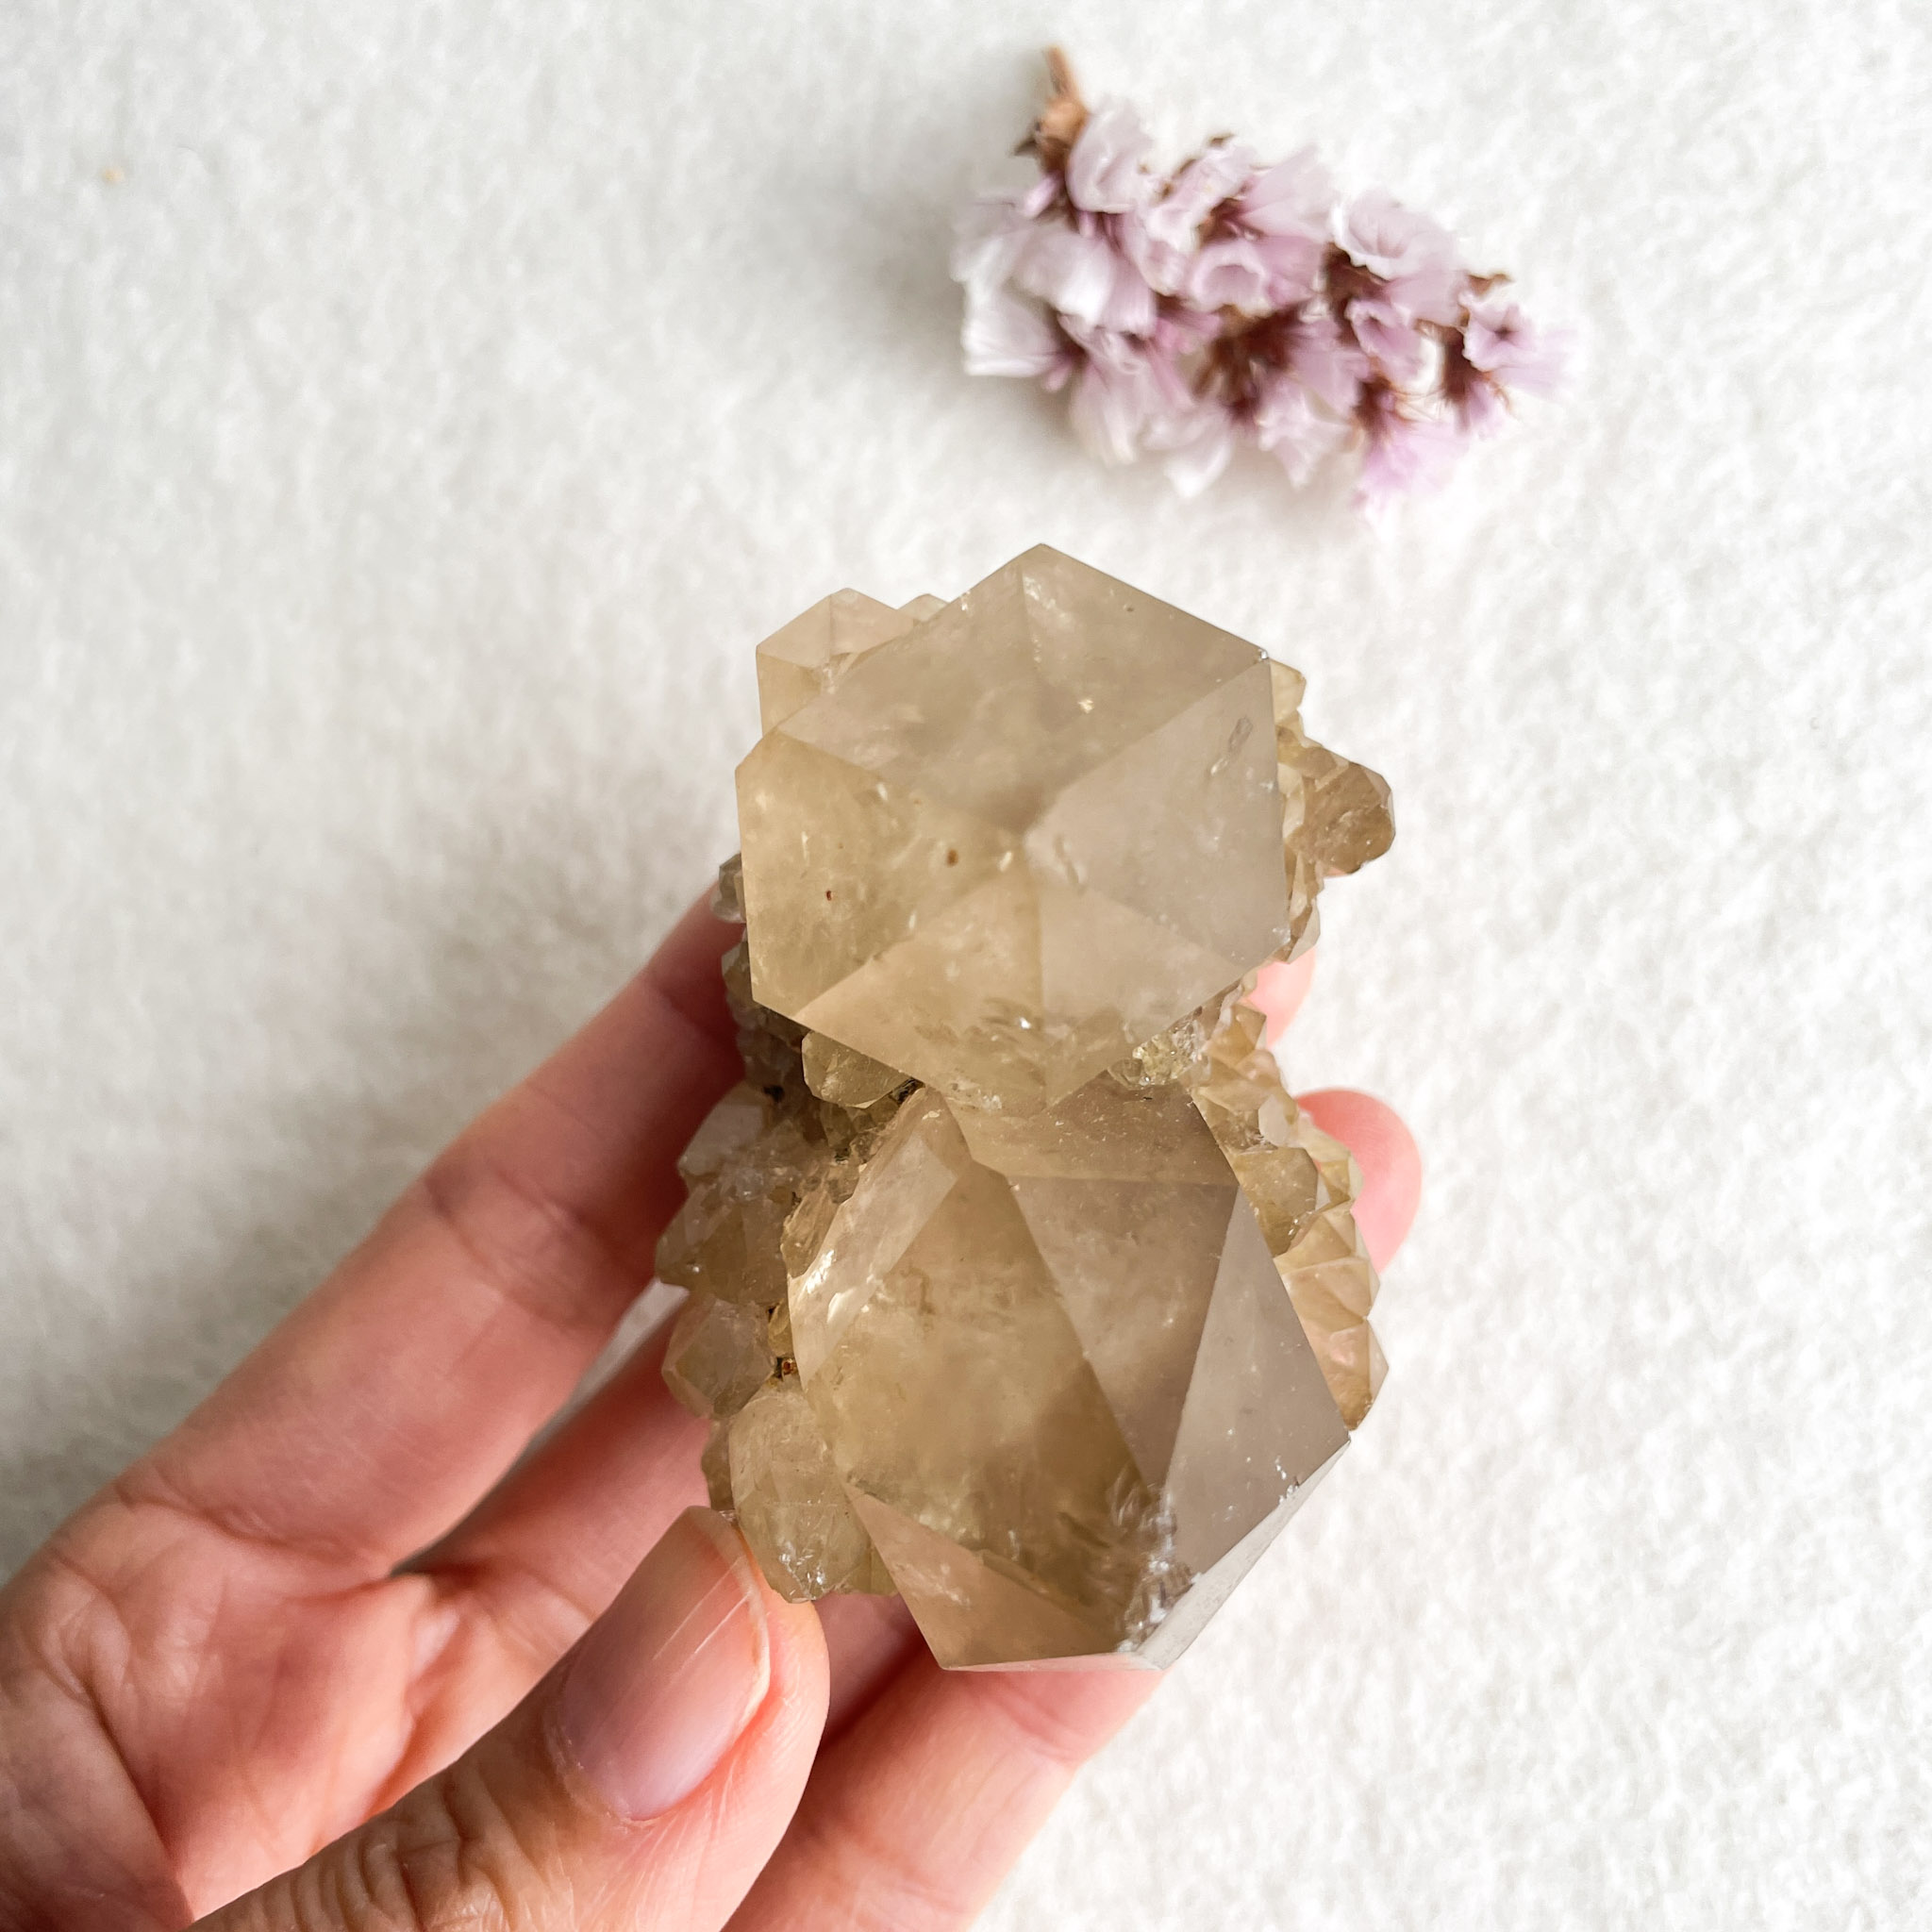 A hand holding a cluster of translucent crystalline minerals with a few small, dry pink flowers in the background on a white surface.